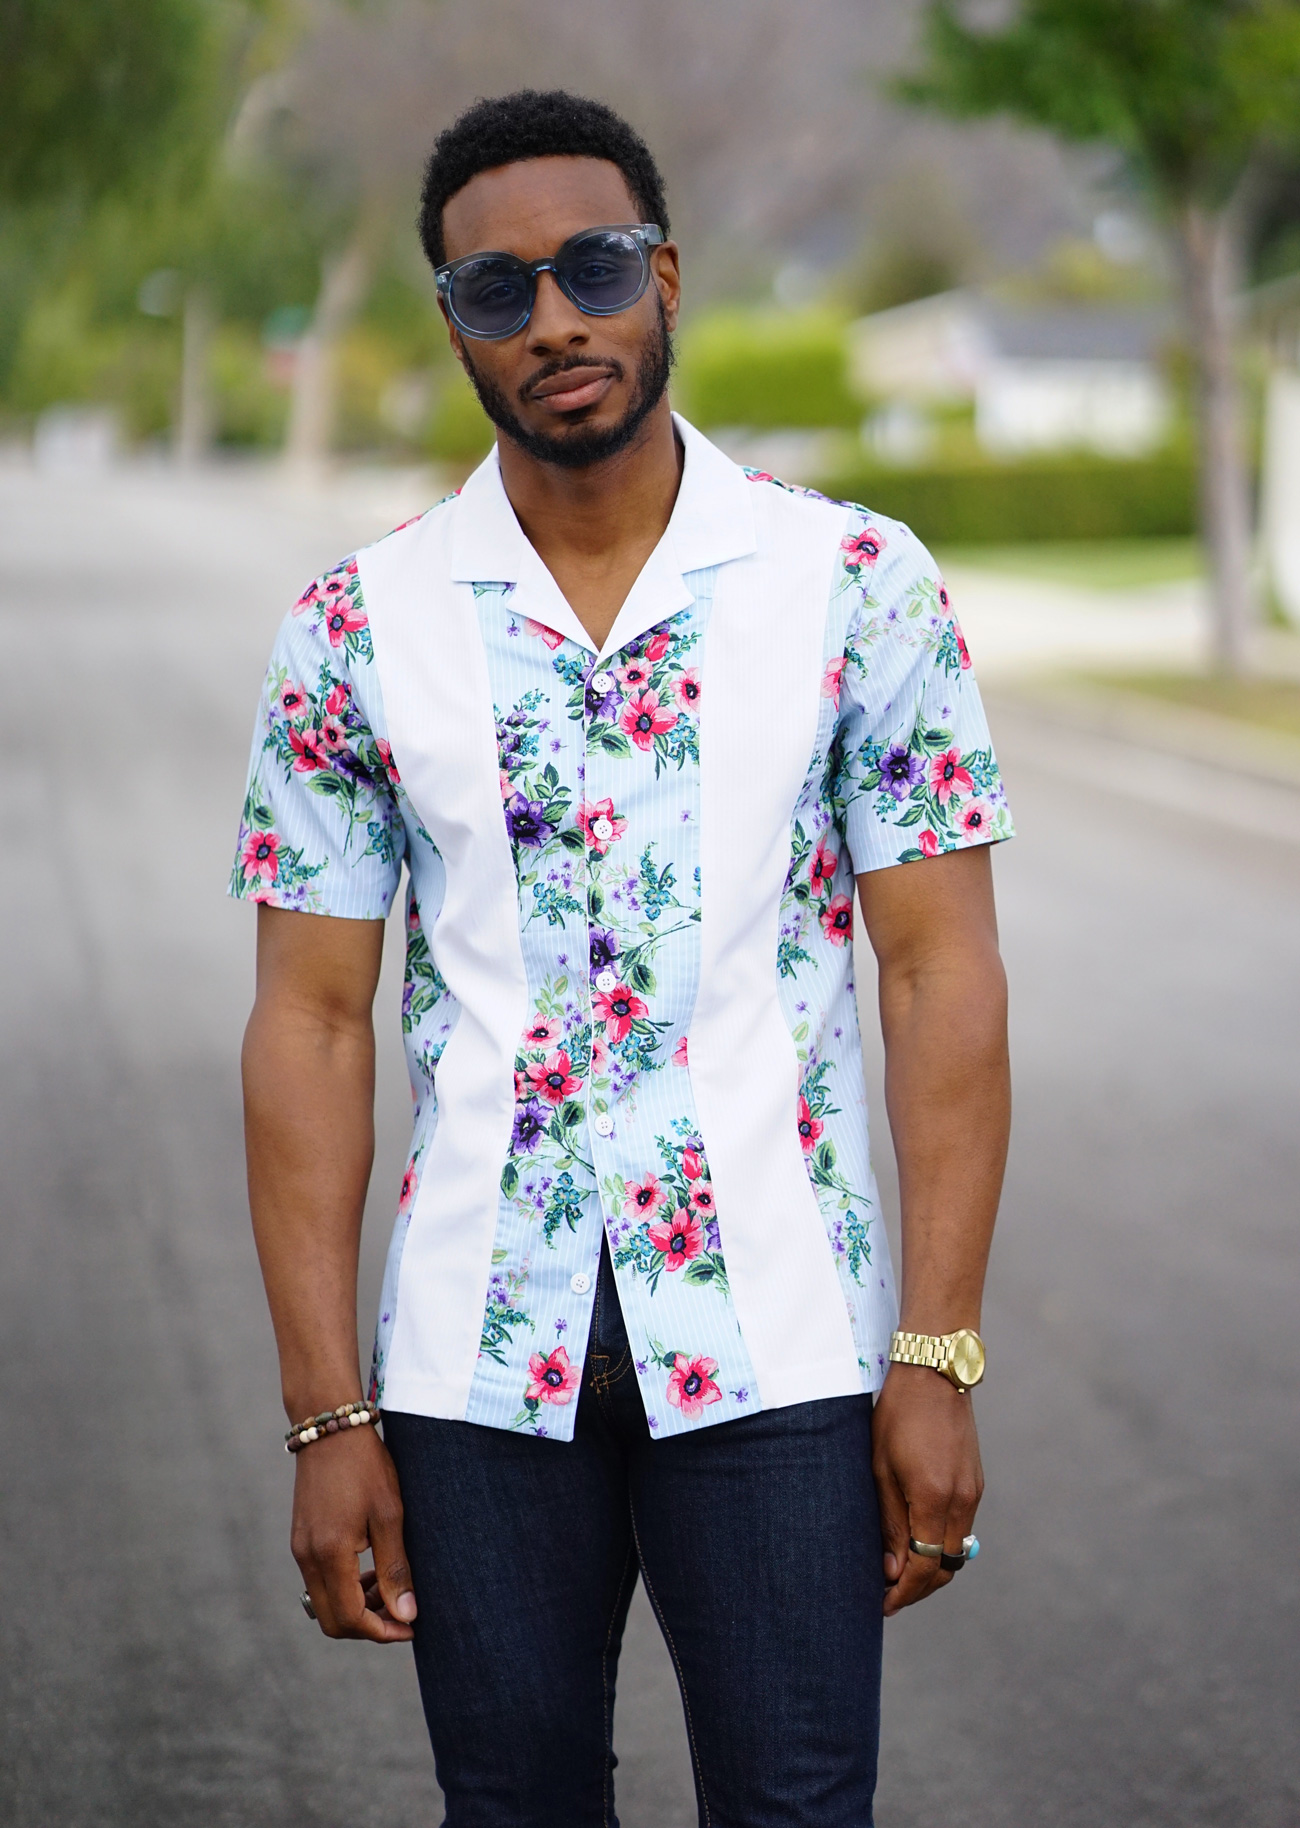 NEW BOWLING SHIRT STYLED IN CASUAL STREETWEAR – Norris Danta Ford